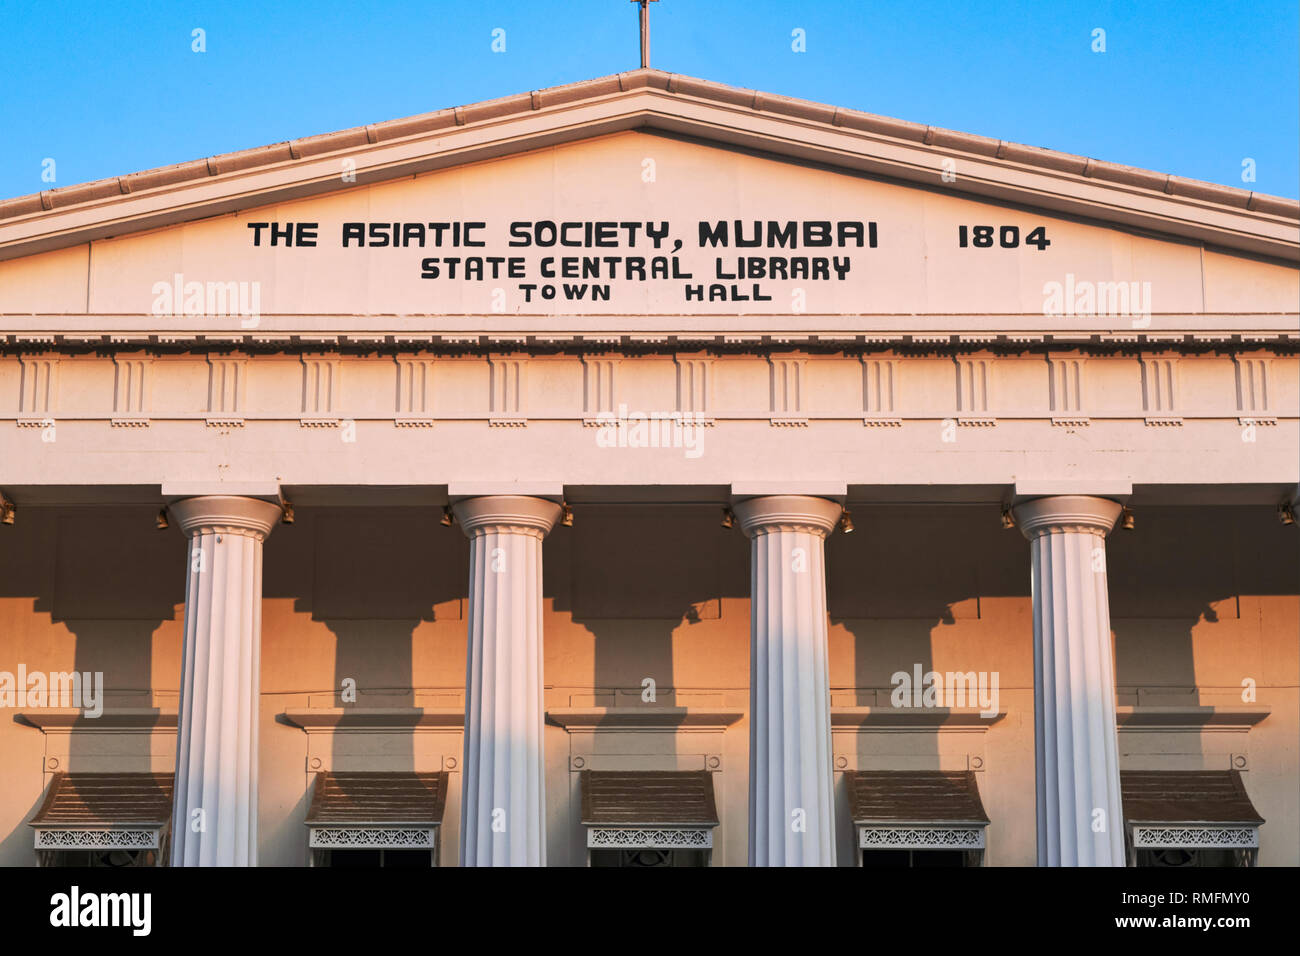 The Asiatic Society of Mumbai and Library, in colonial times the Town Hall, located at Horniman Circle, Fort, Mumbai, India Stock Photo